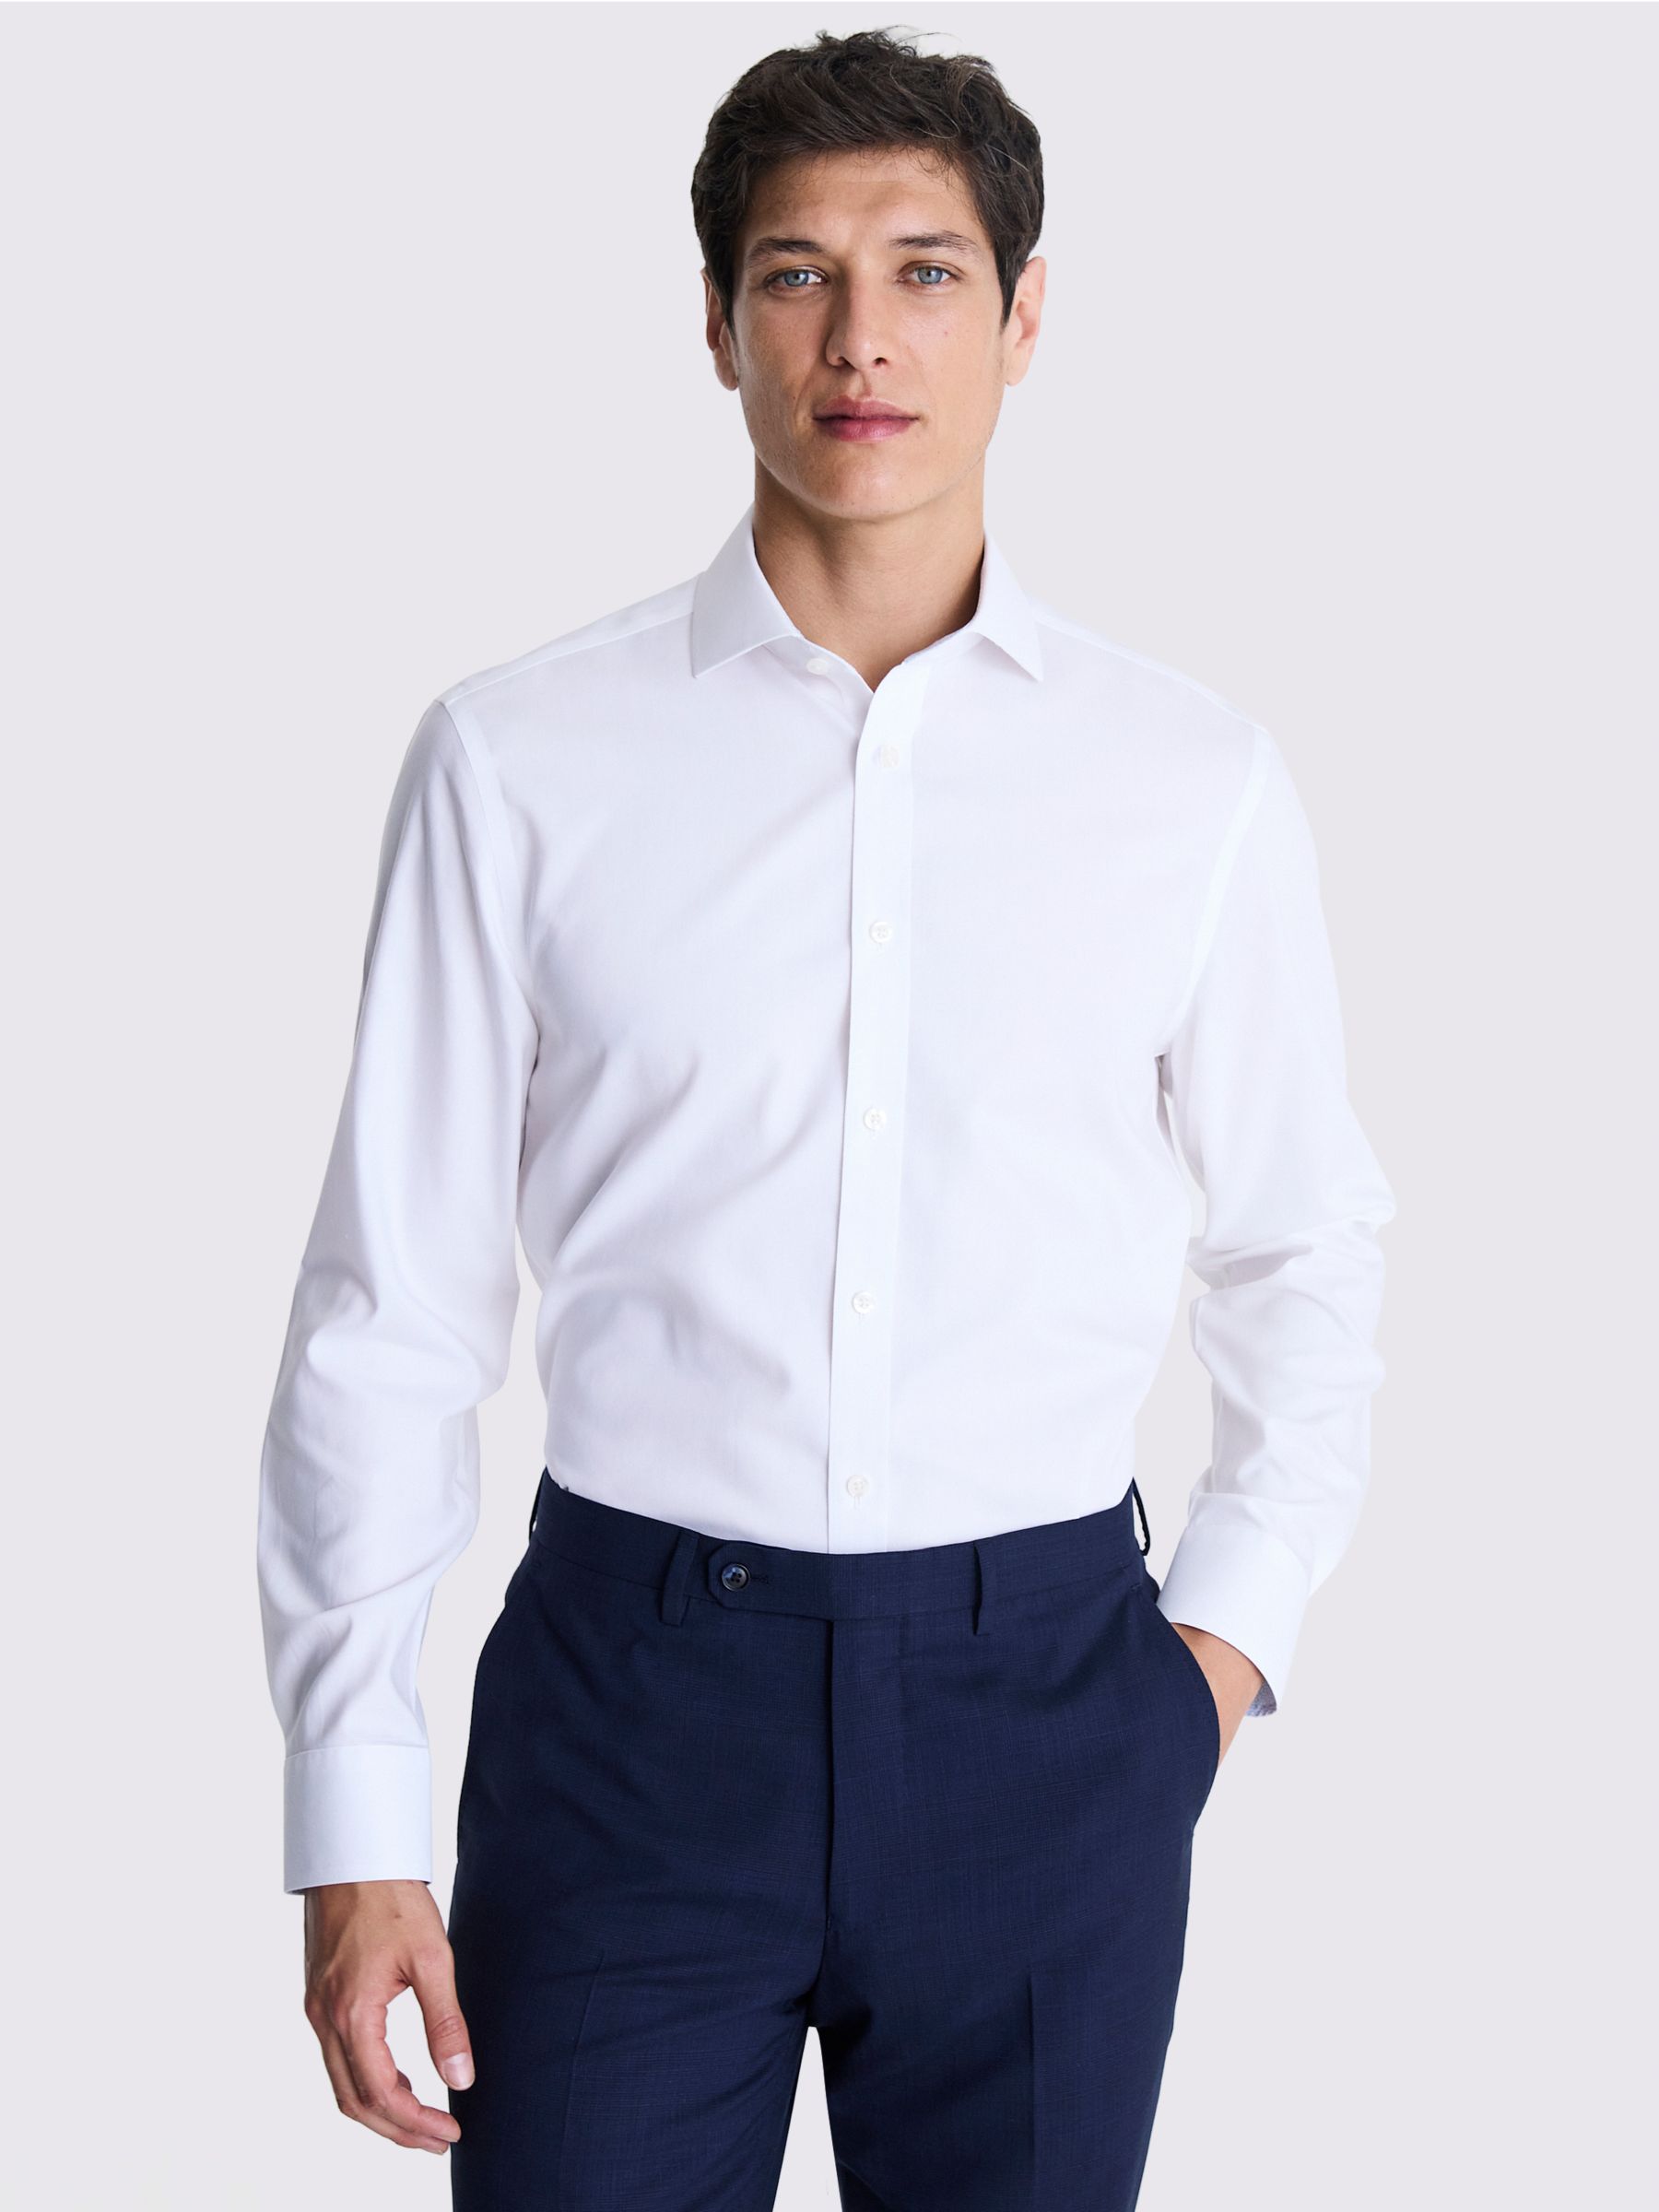 Moss Tailored Fit Pinpoint Oxford Contrast Non Iron Shirt, White, 16